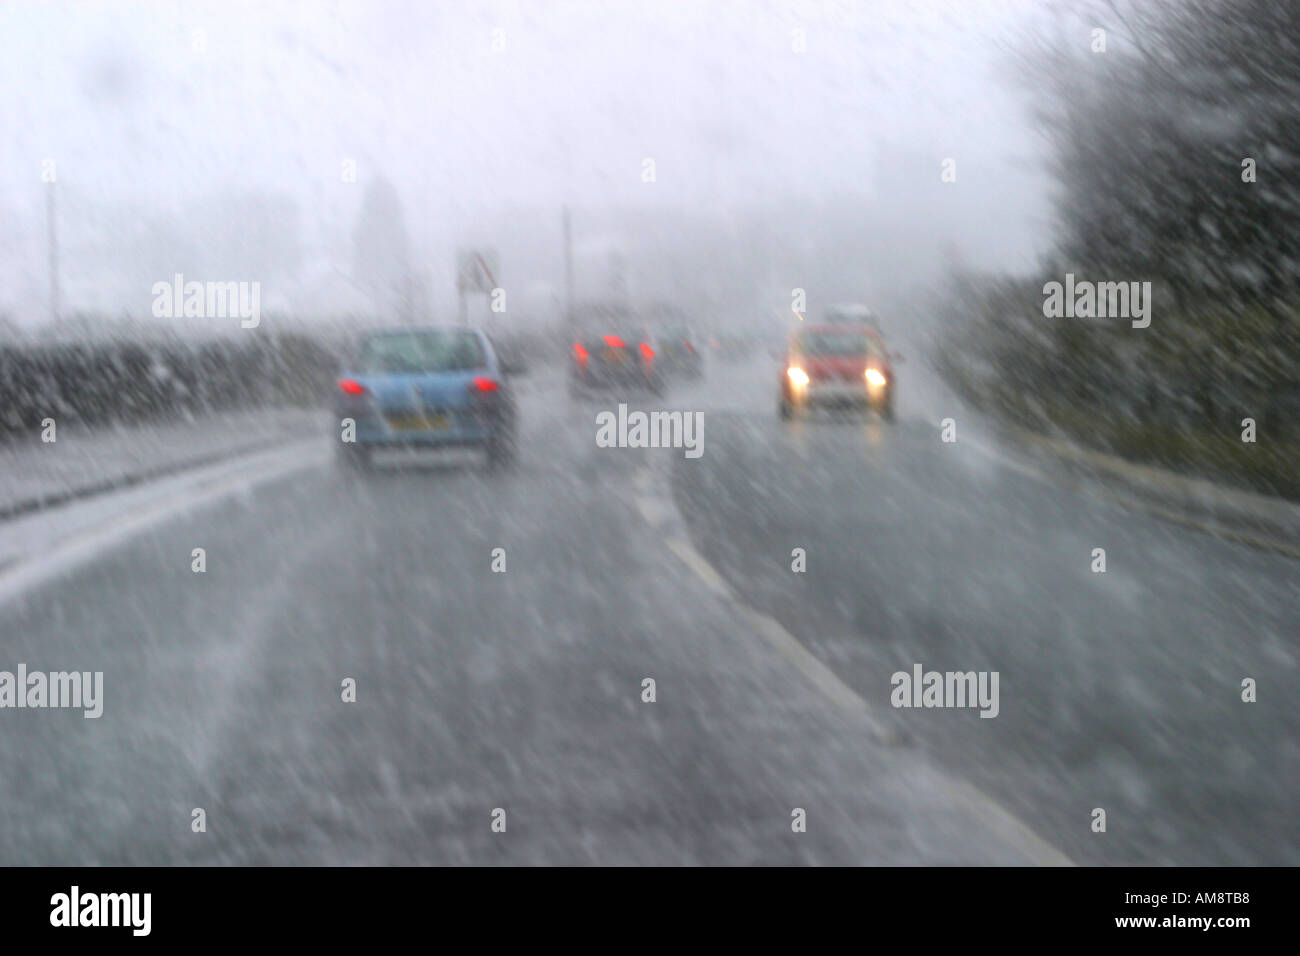 Urban road from in car with driving sleet and snow Stock Photo